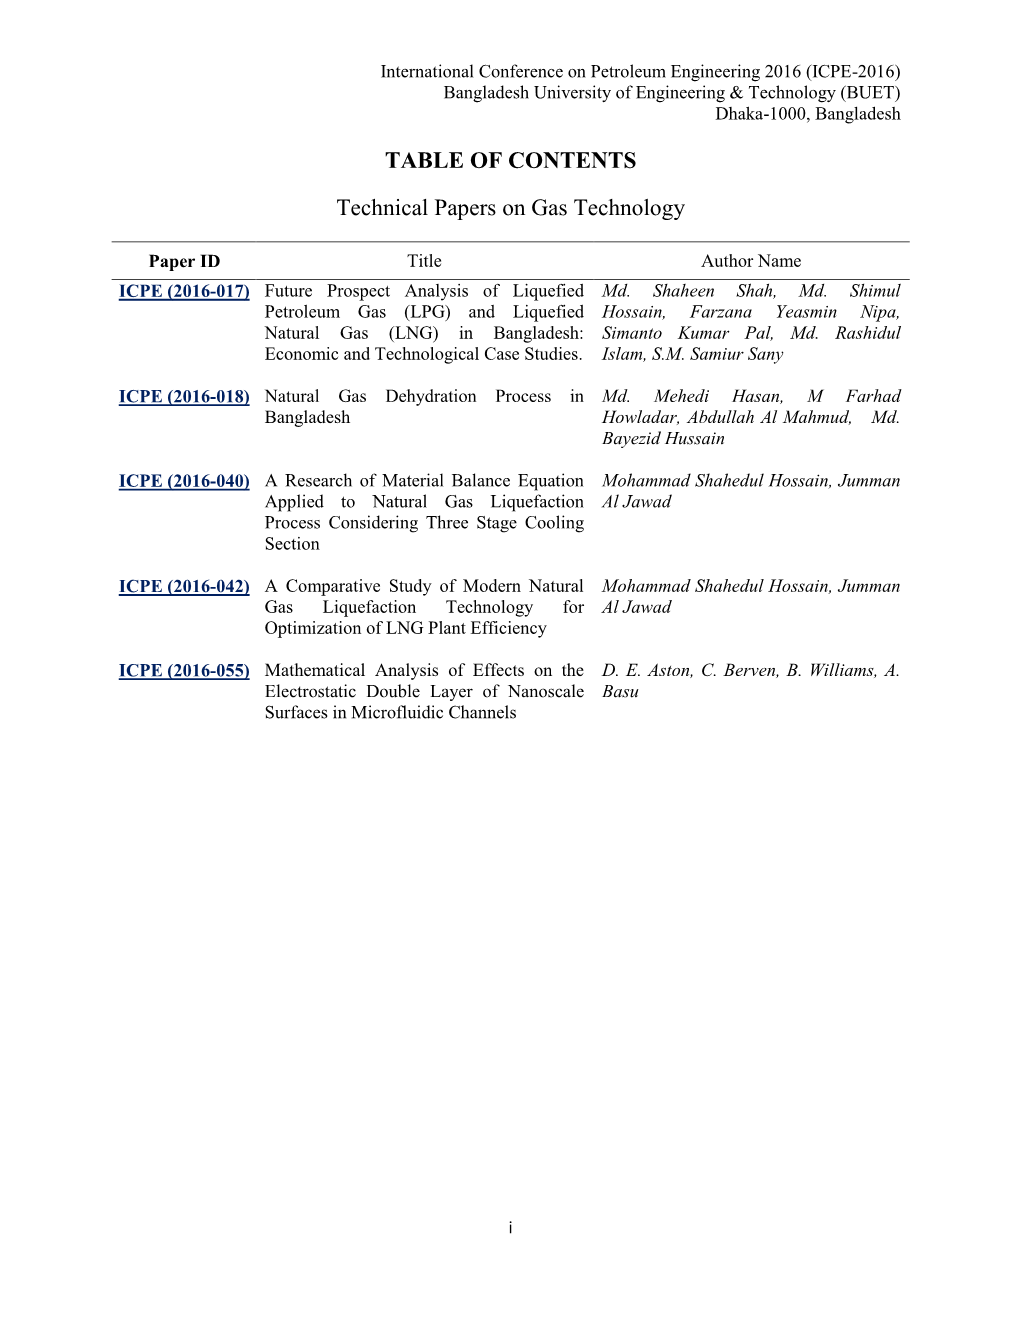 TABLE of CONTENTS Technical Papers on Gas Technology